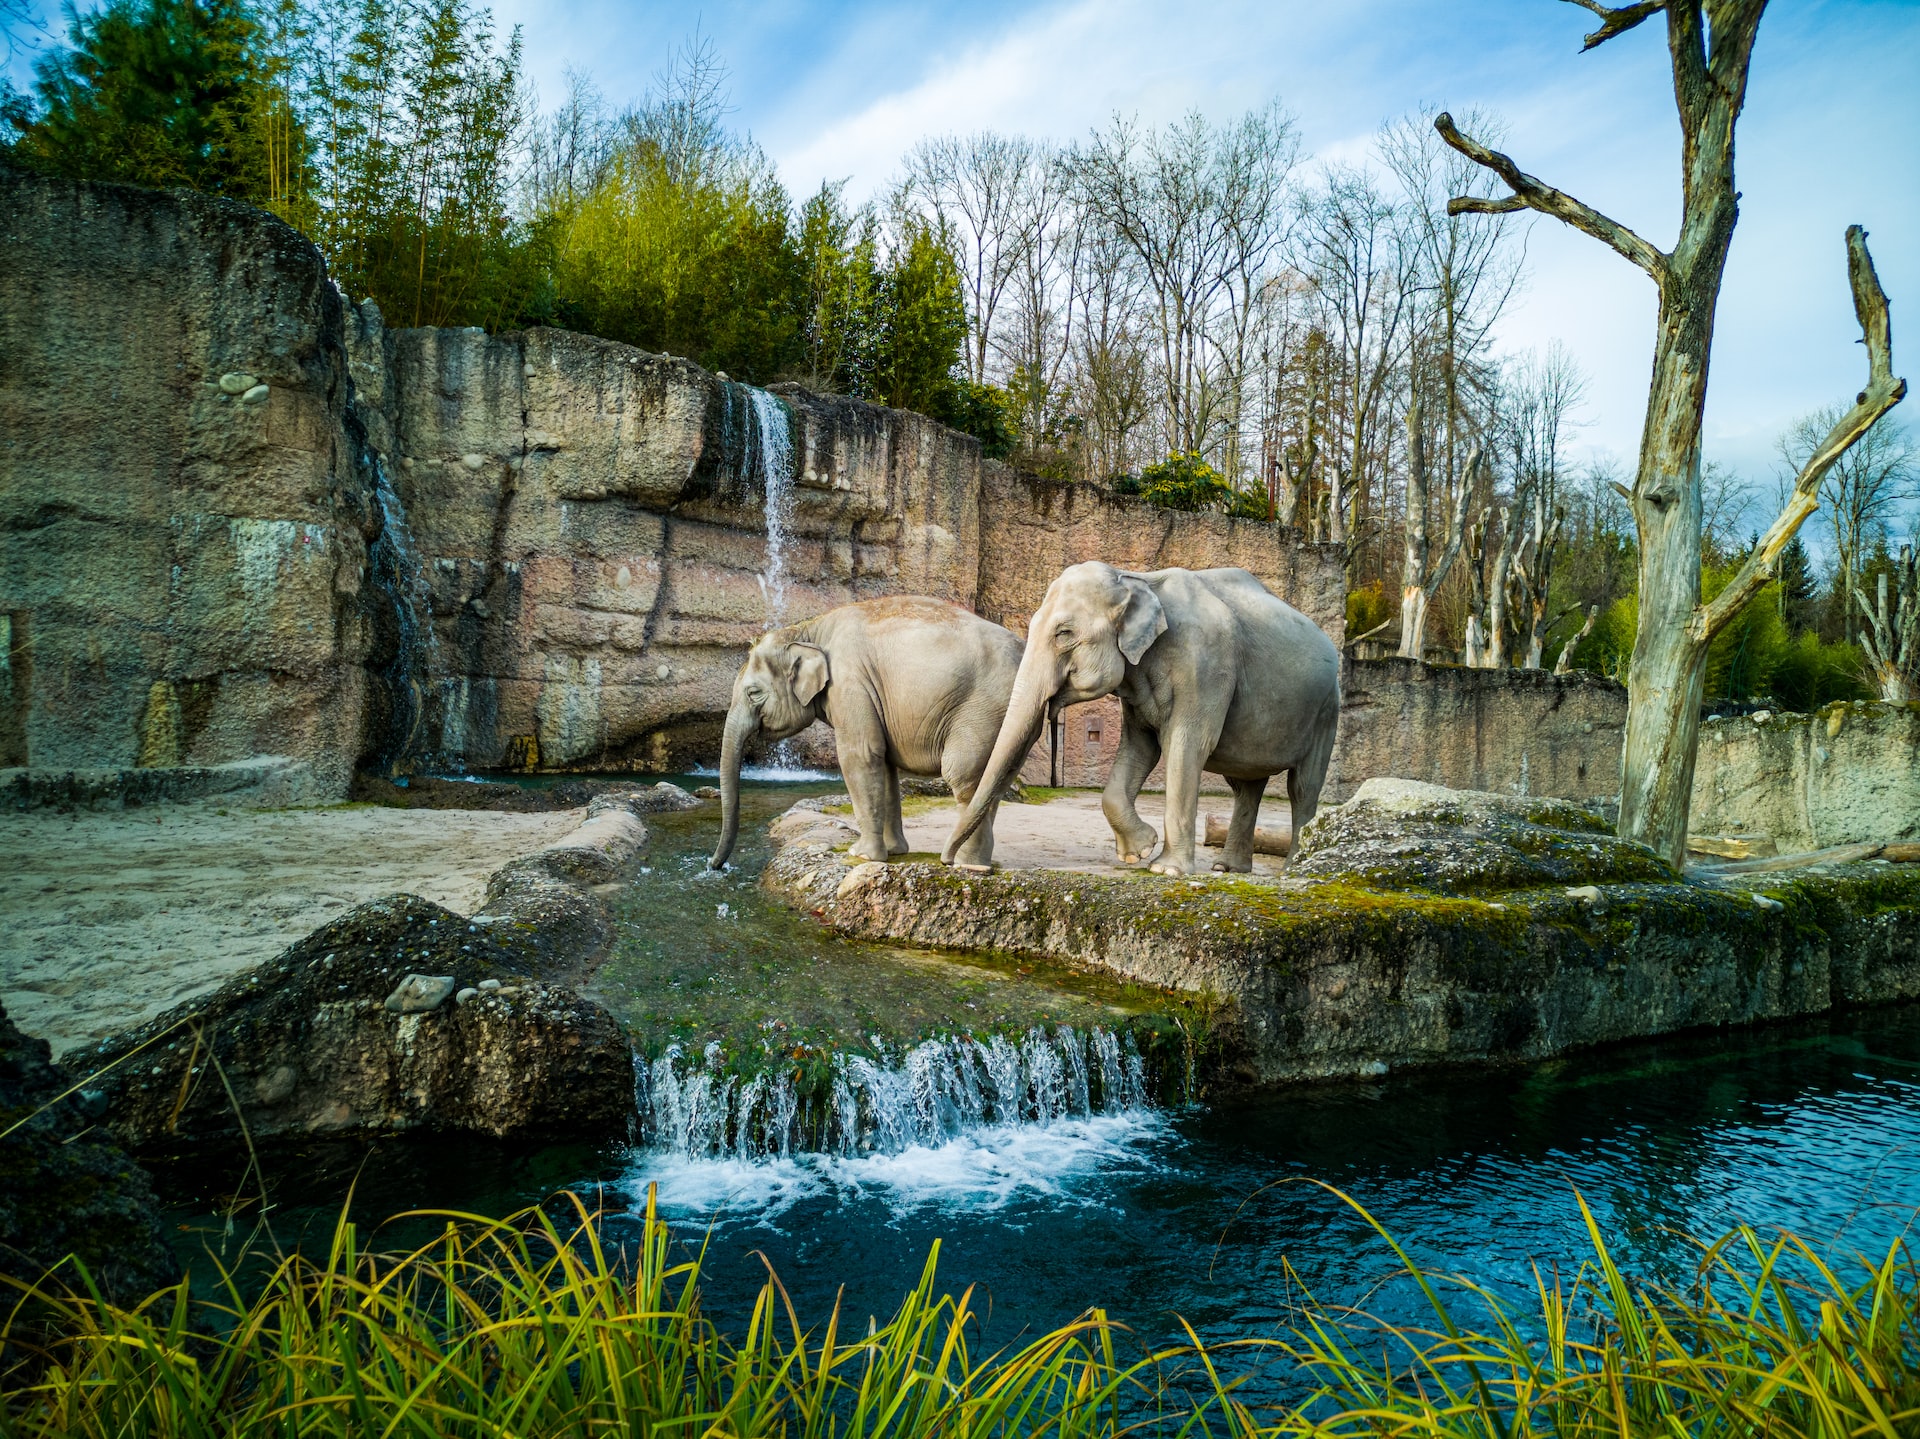 Do Zoos Have Effects on Animal Health and Well-Being